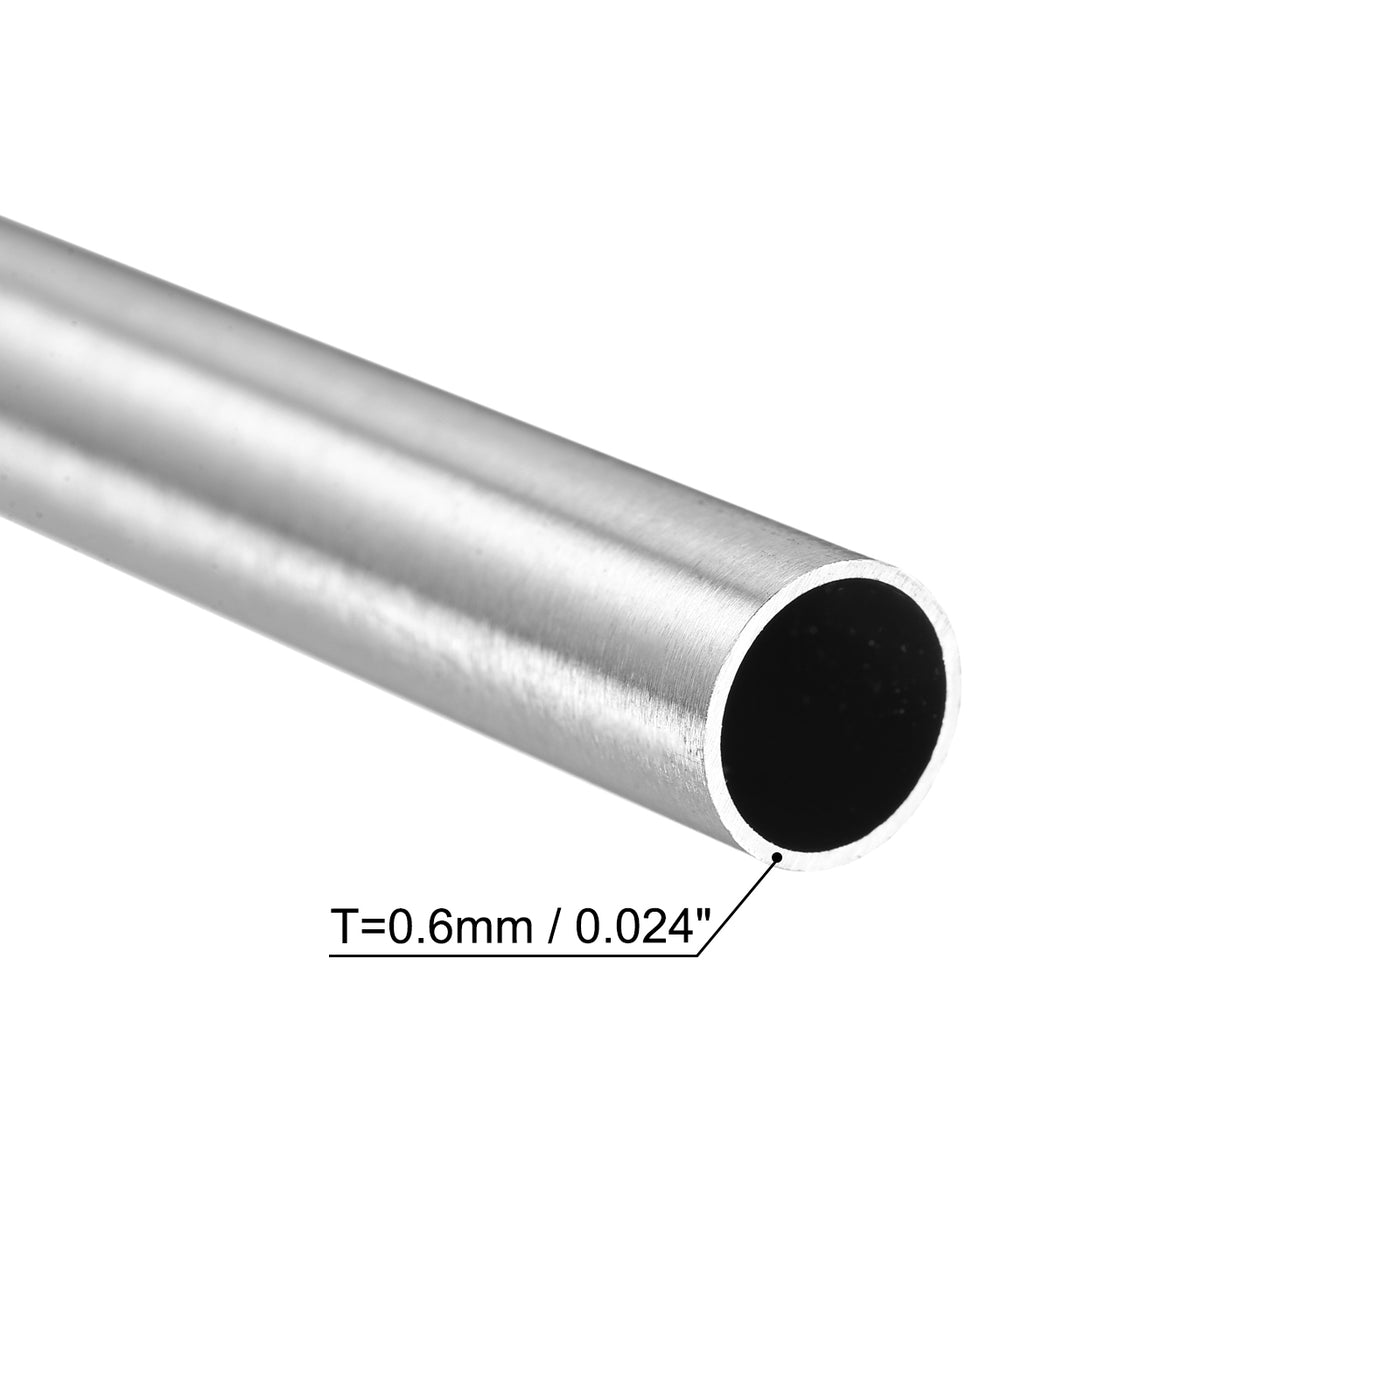 Uxcell Uxcell 304 Stainless Steel Round Tube 12mm OD 0.3mm Wall Thickness 300mm Length